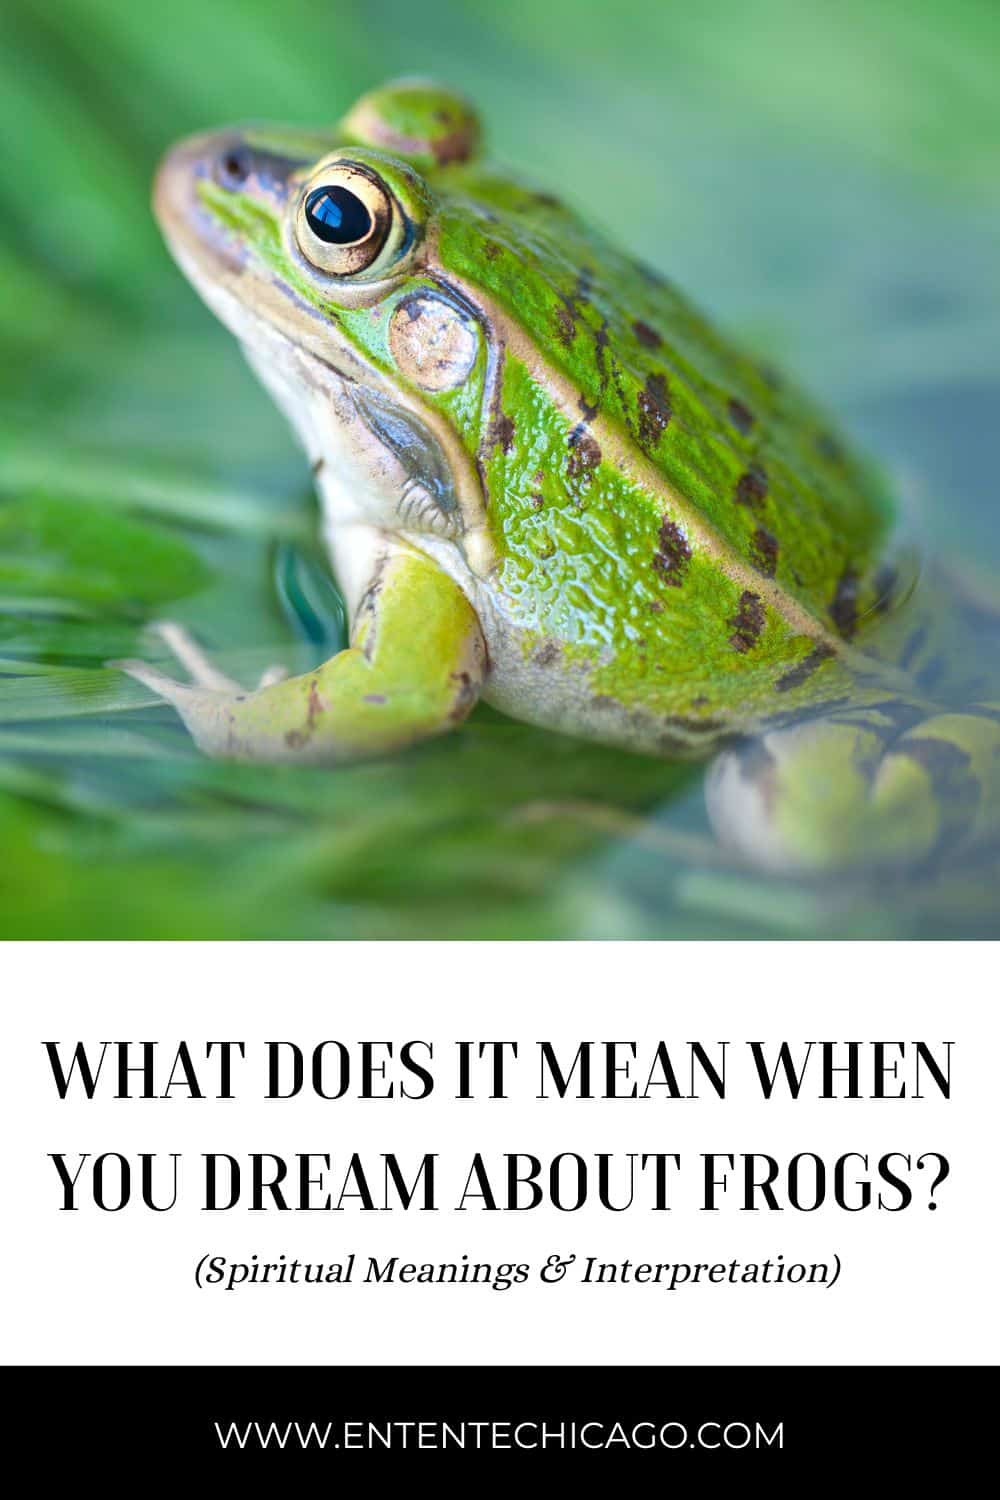 What Does It Mean When You Dream About Frogs? (8 Spiritual Meanings)